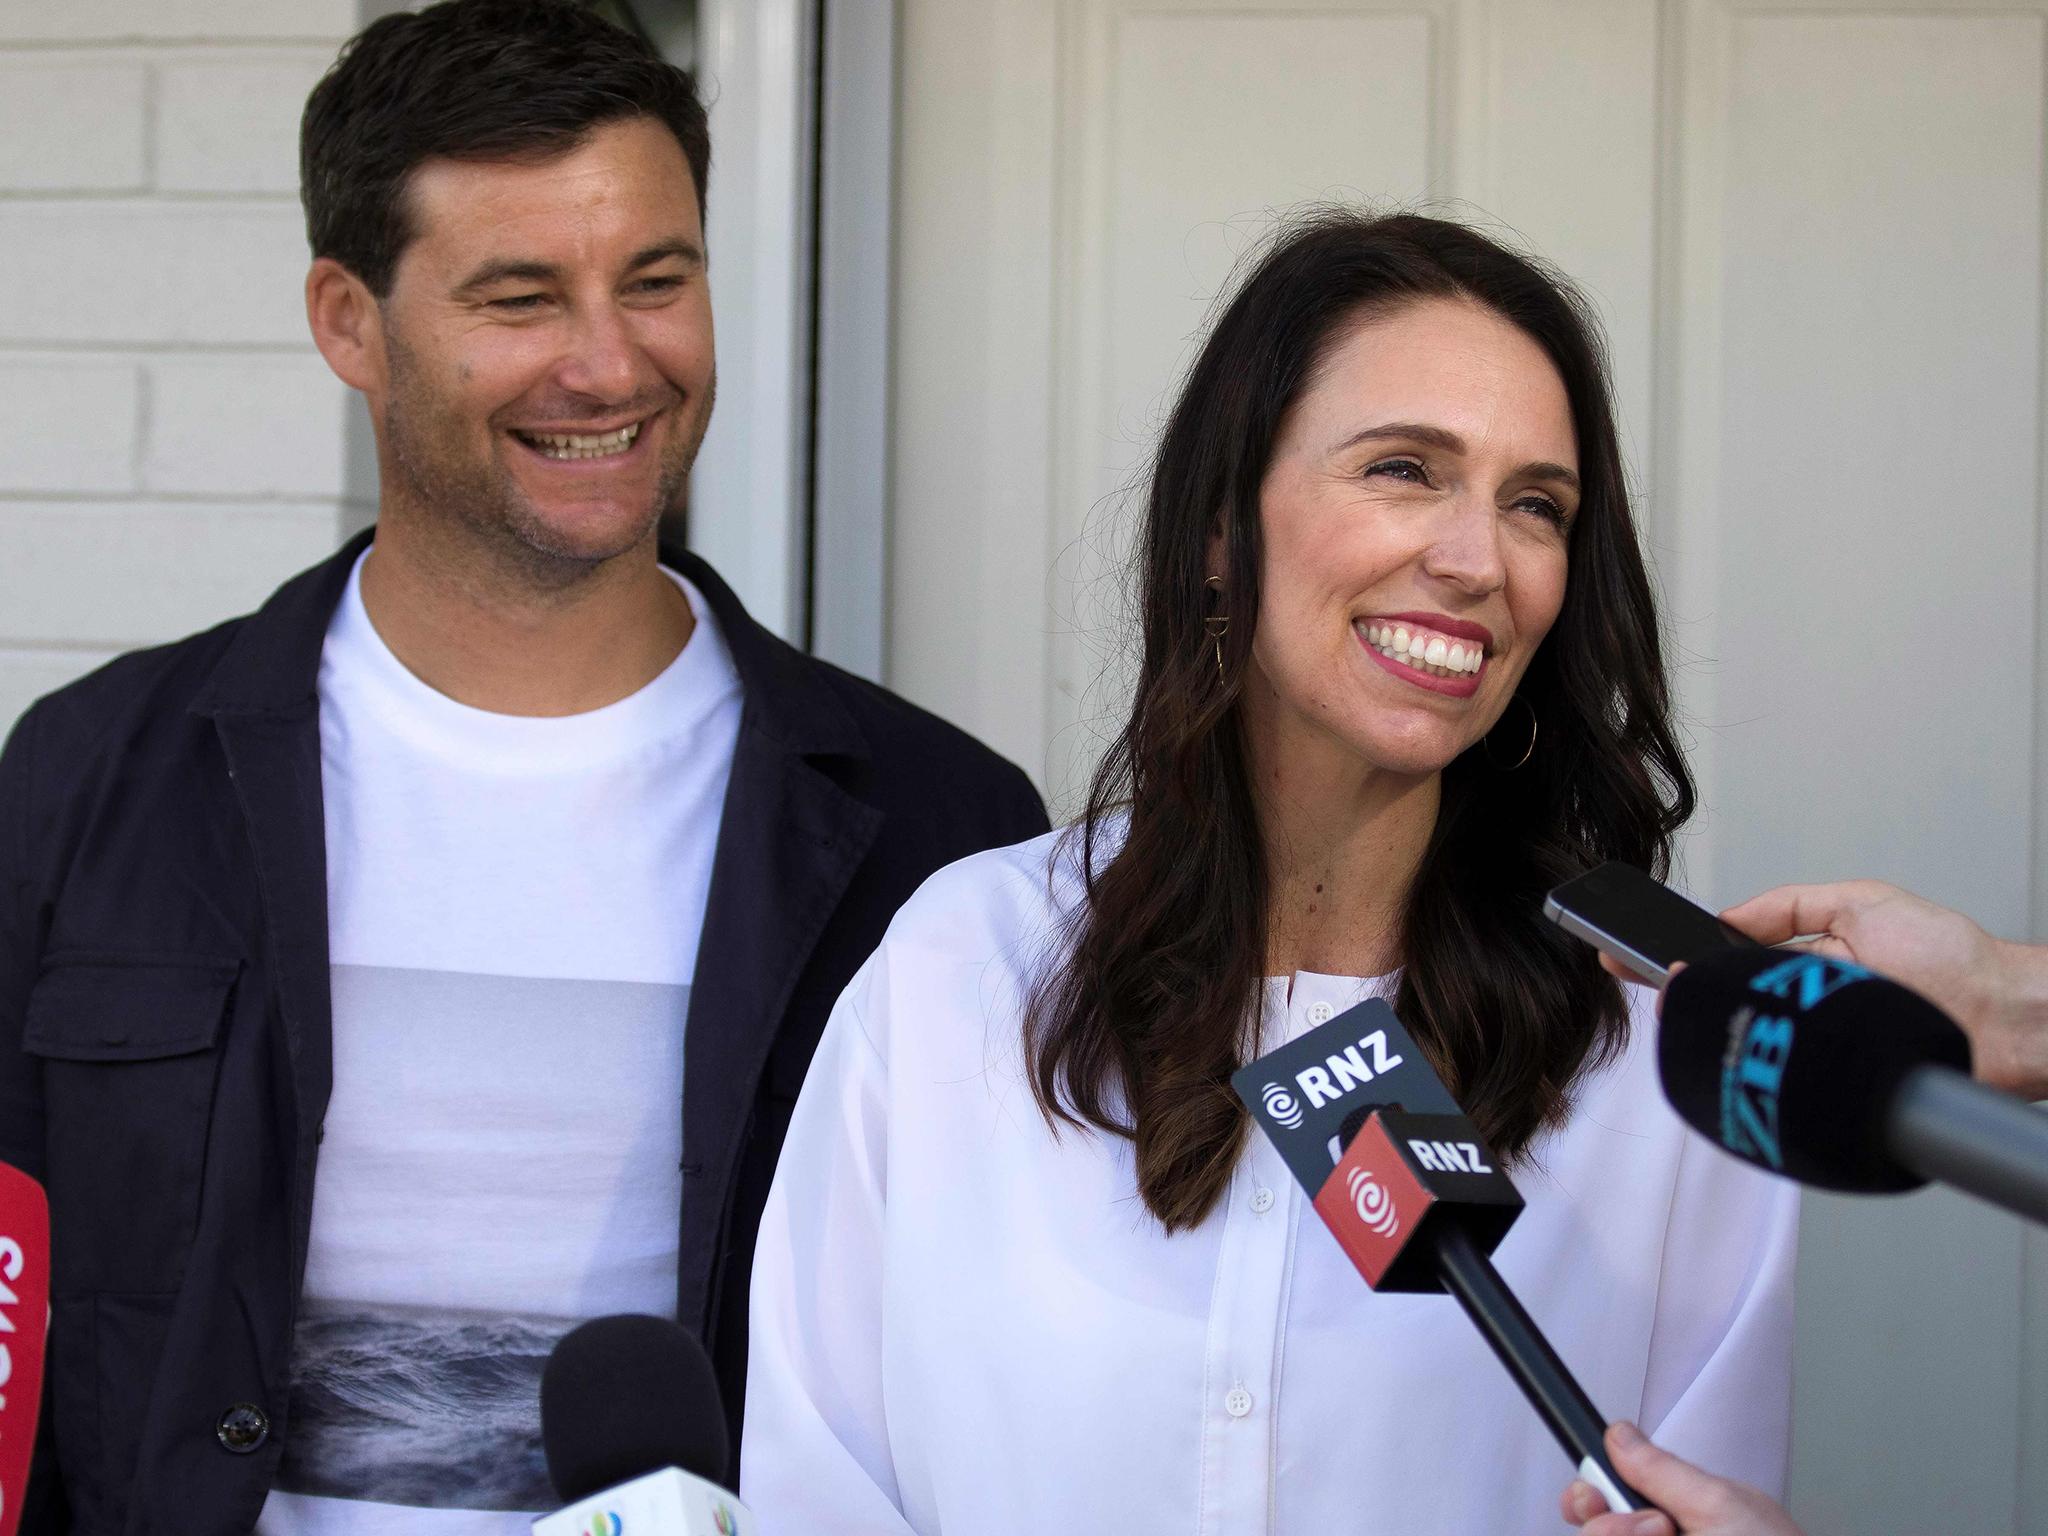 The head of government revealed she is anticipating her baby and that her partner will become a stay-at-home dad